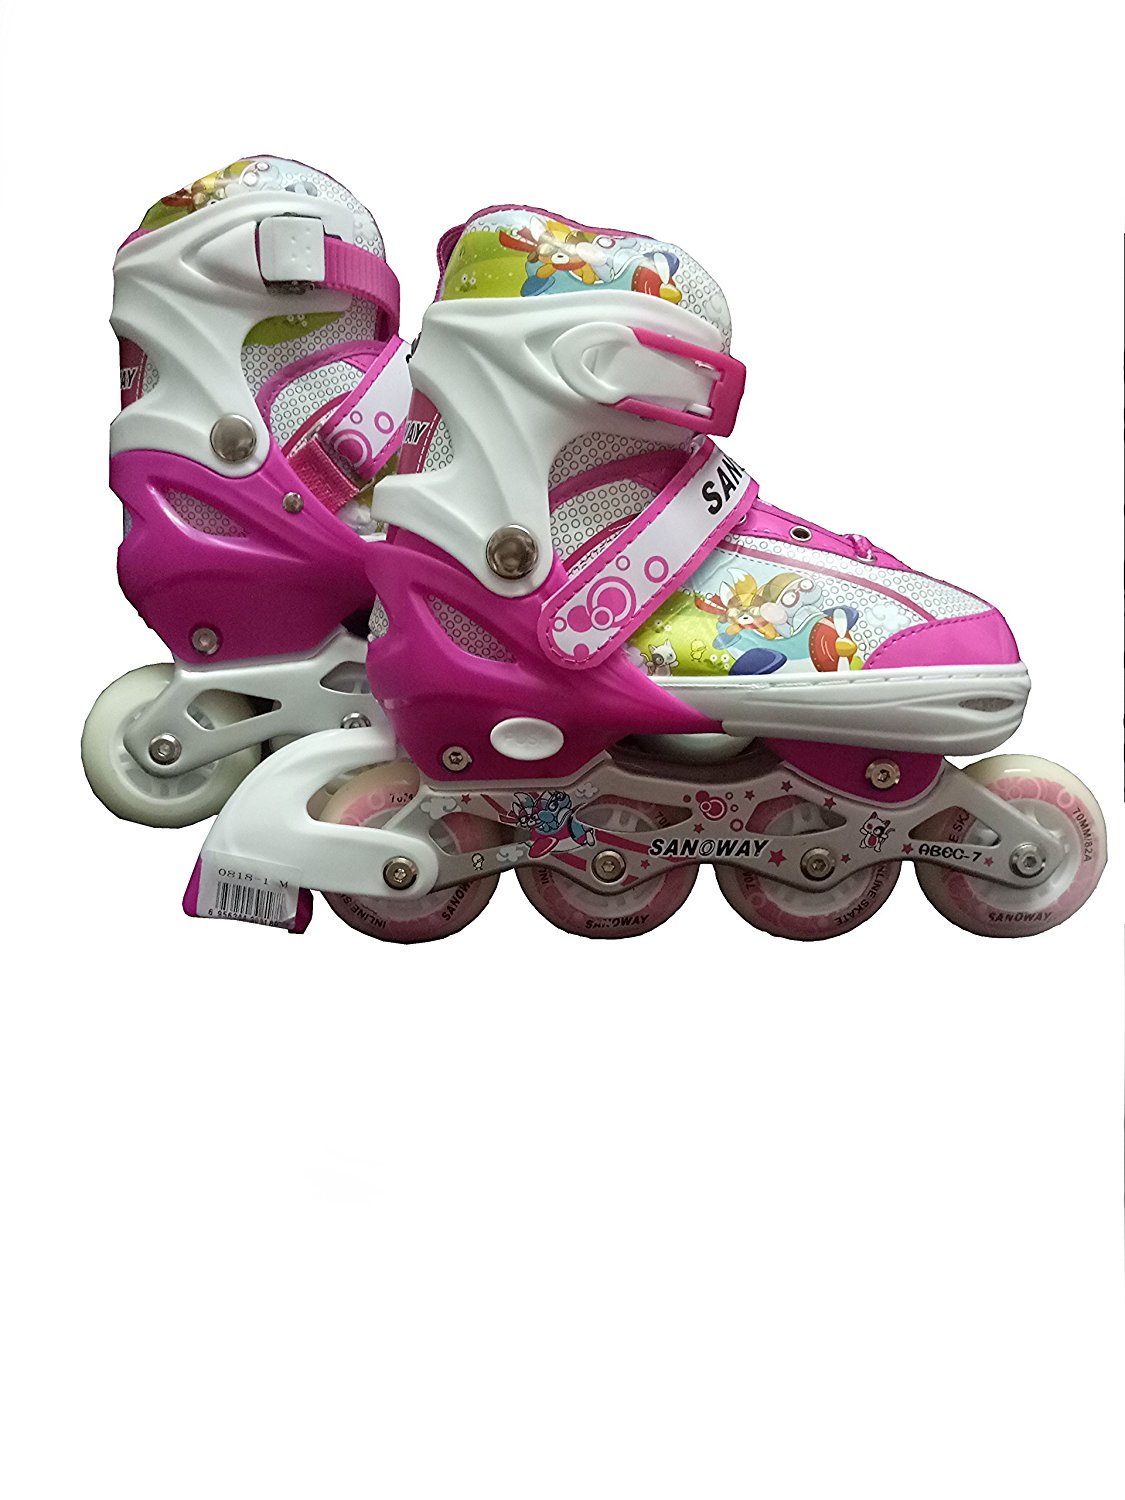 Buy Inline Skate Shoes Adjustable M Size 35 to 38 Age 6-10Years Pink